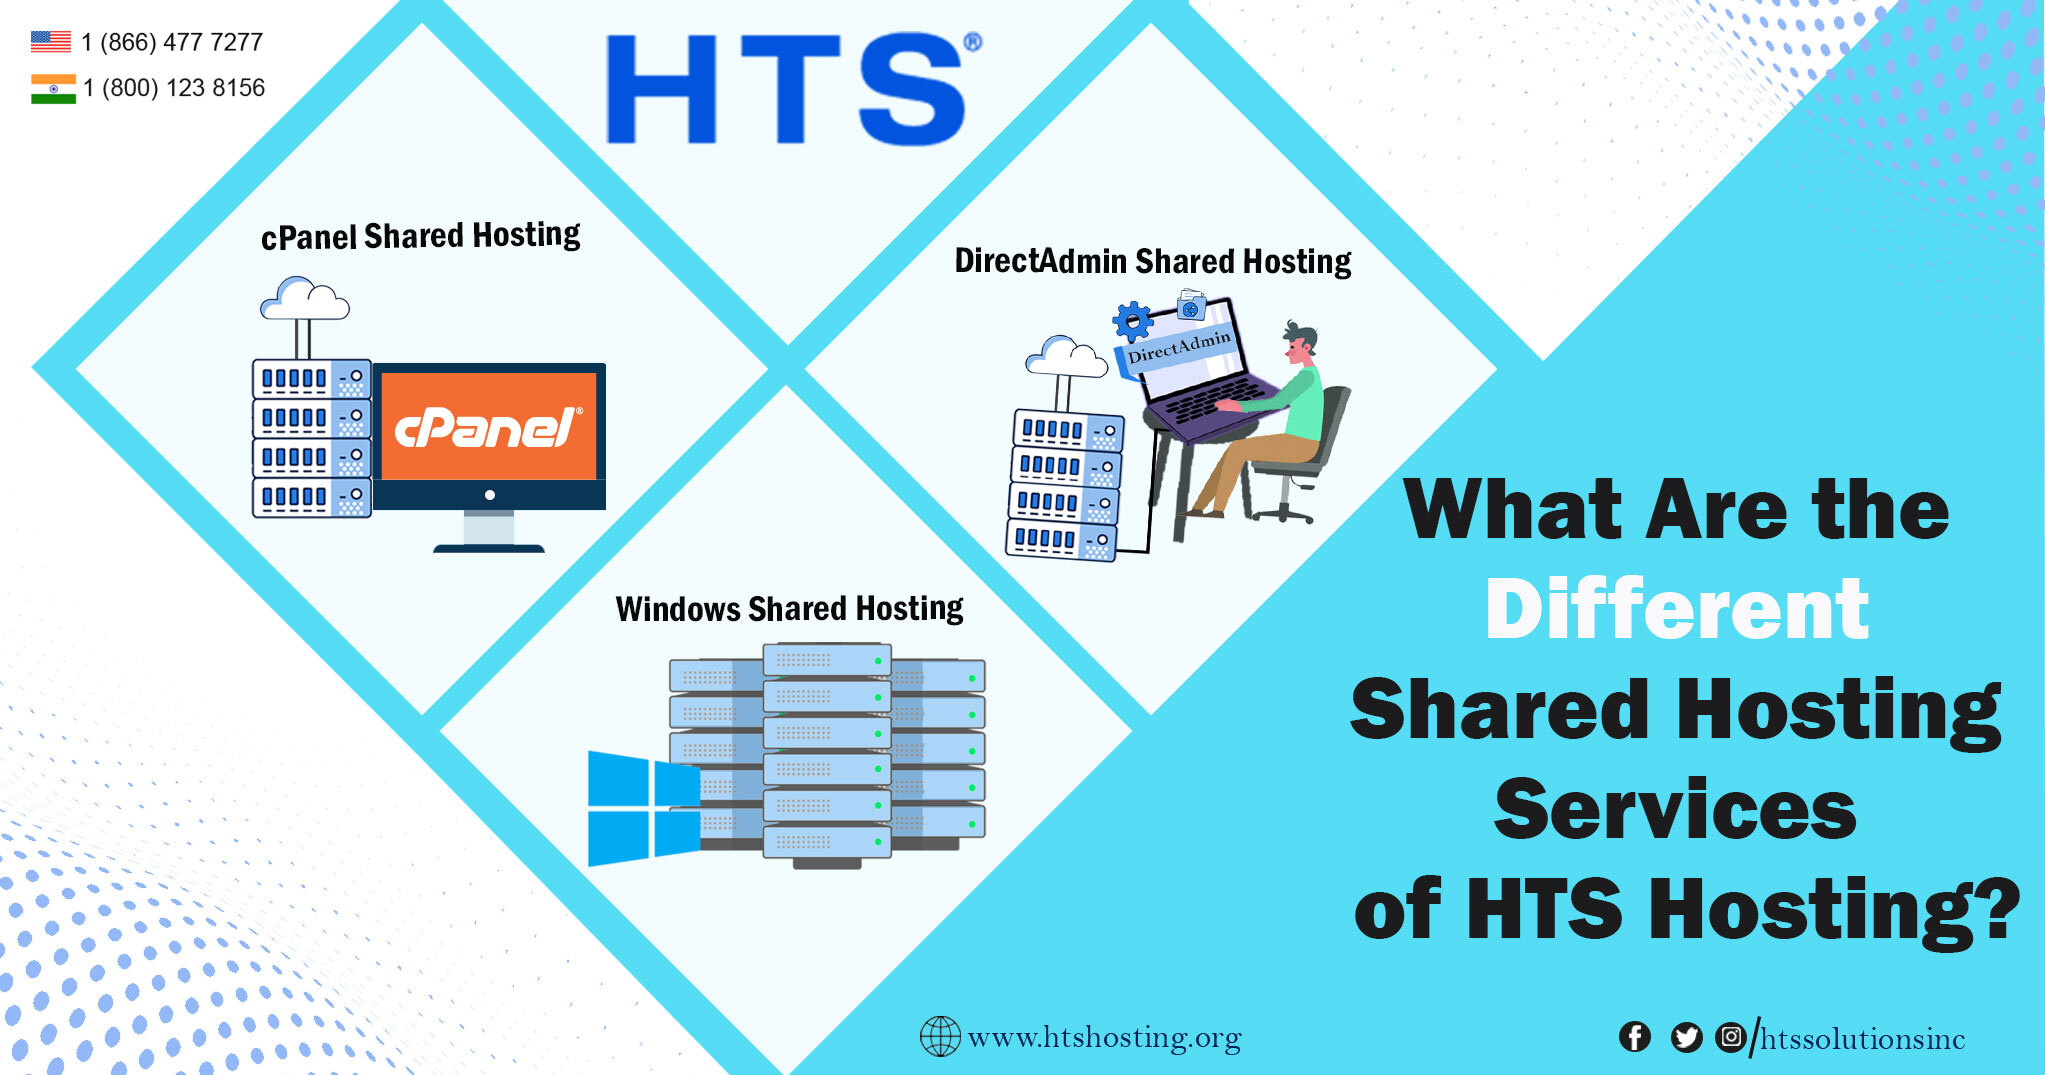 What Are the Different Shared Hosting Services of HTS Hosting?